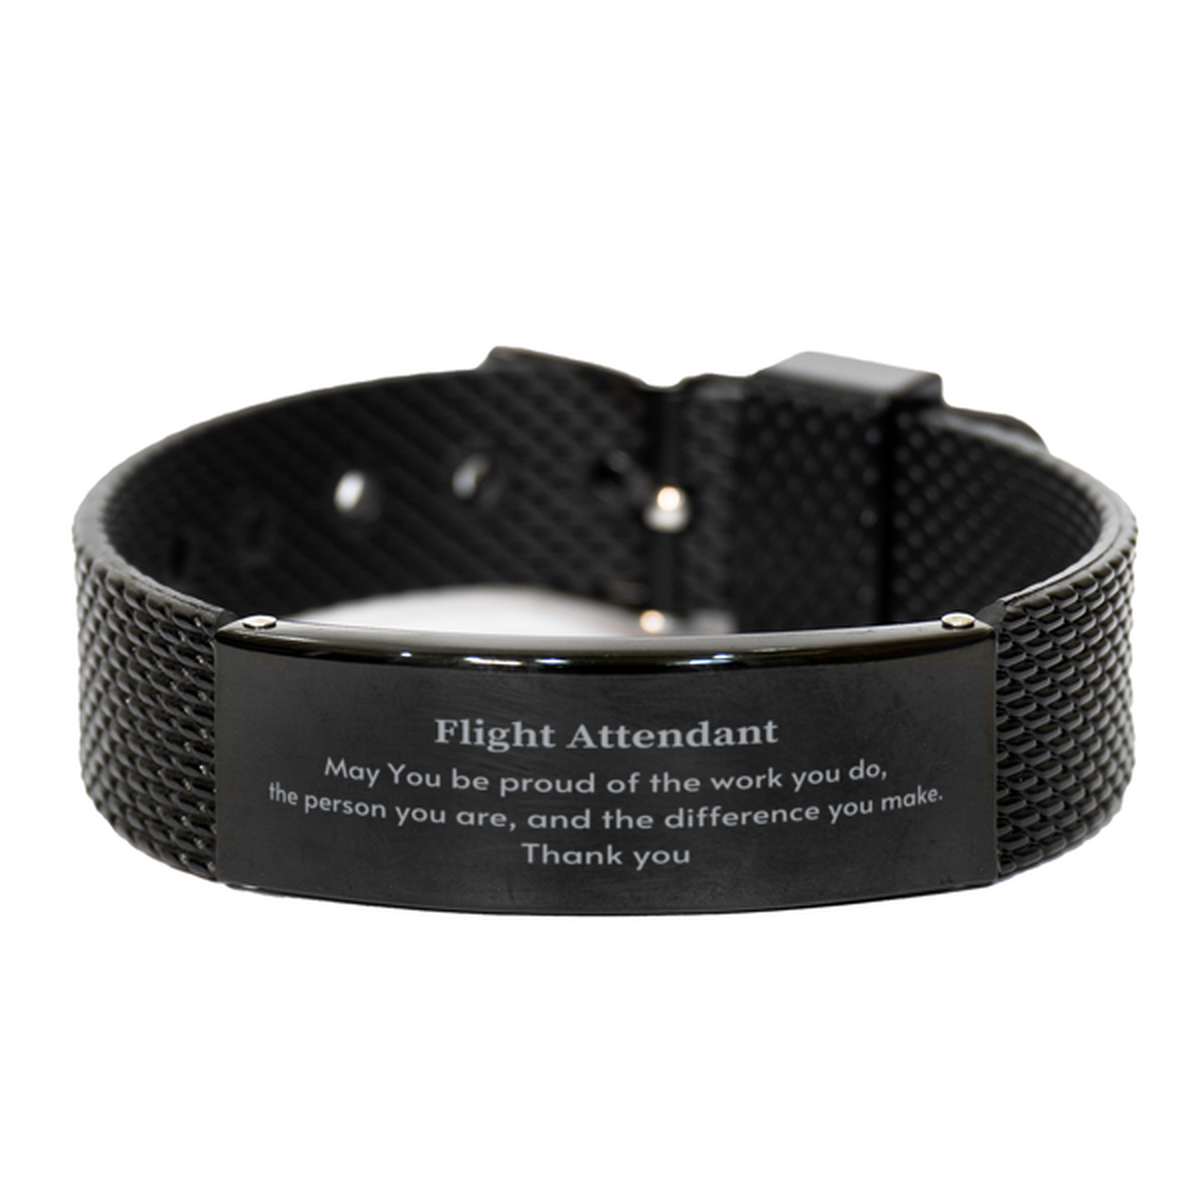 Heartwarming Black Shark Mesh Bracelet Retirement Coworkers Gifts for Flight Attendant, Flight Attendant May You be proud of the work you do, the person you are Gifts for Boss Men Women Friends